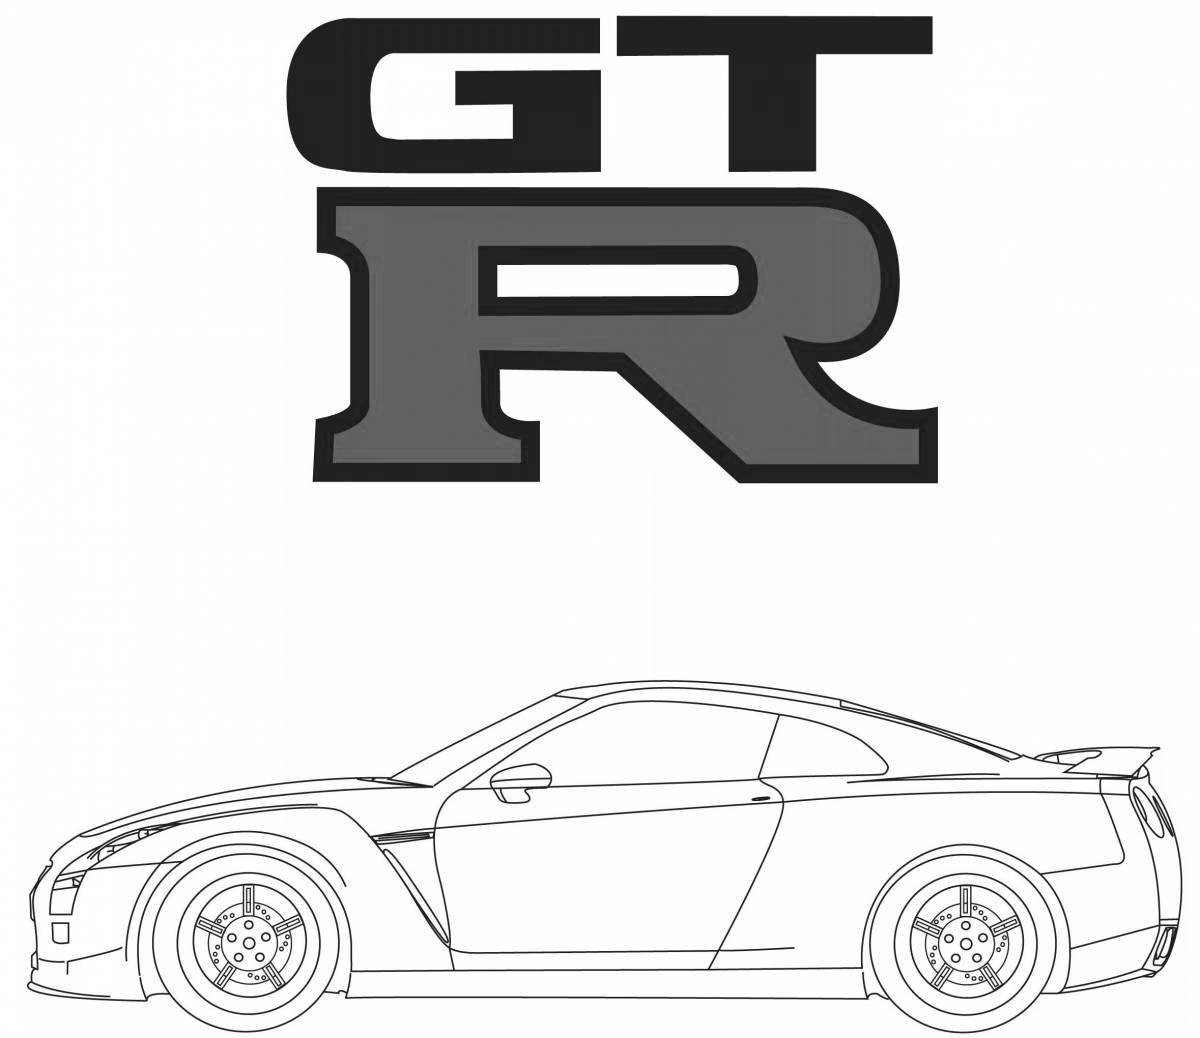 Sublime gtr coloring